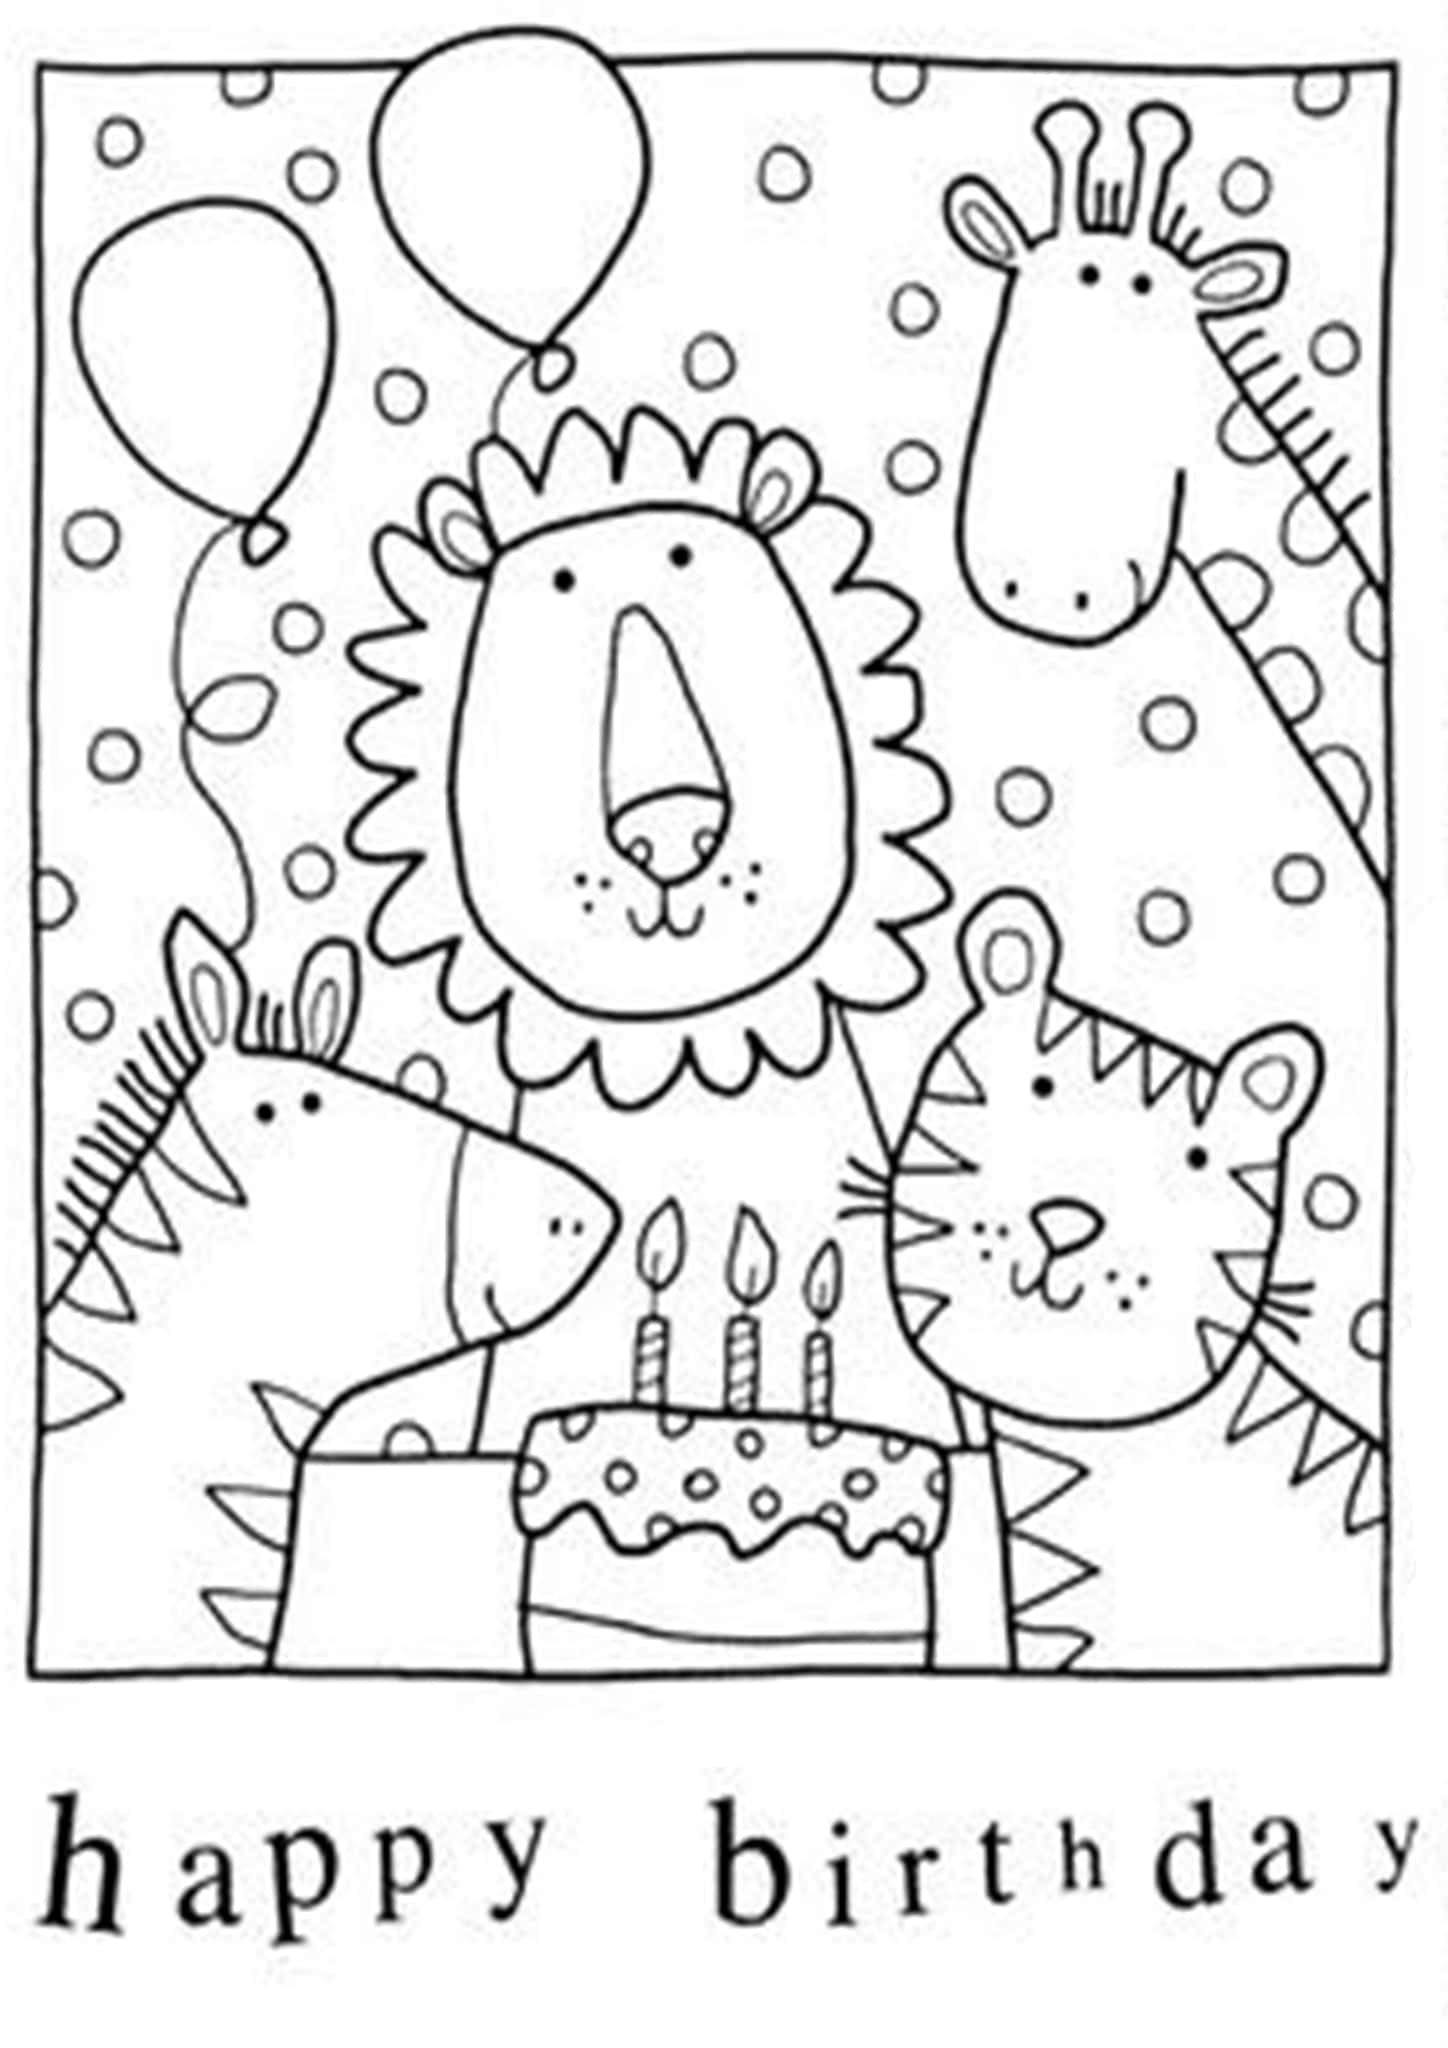 Free easy to print happy birthday coloring pages